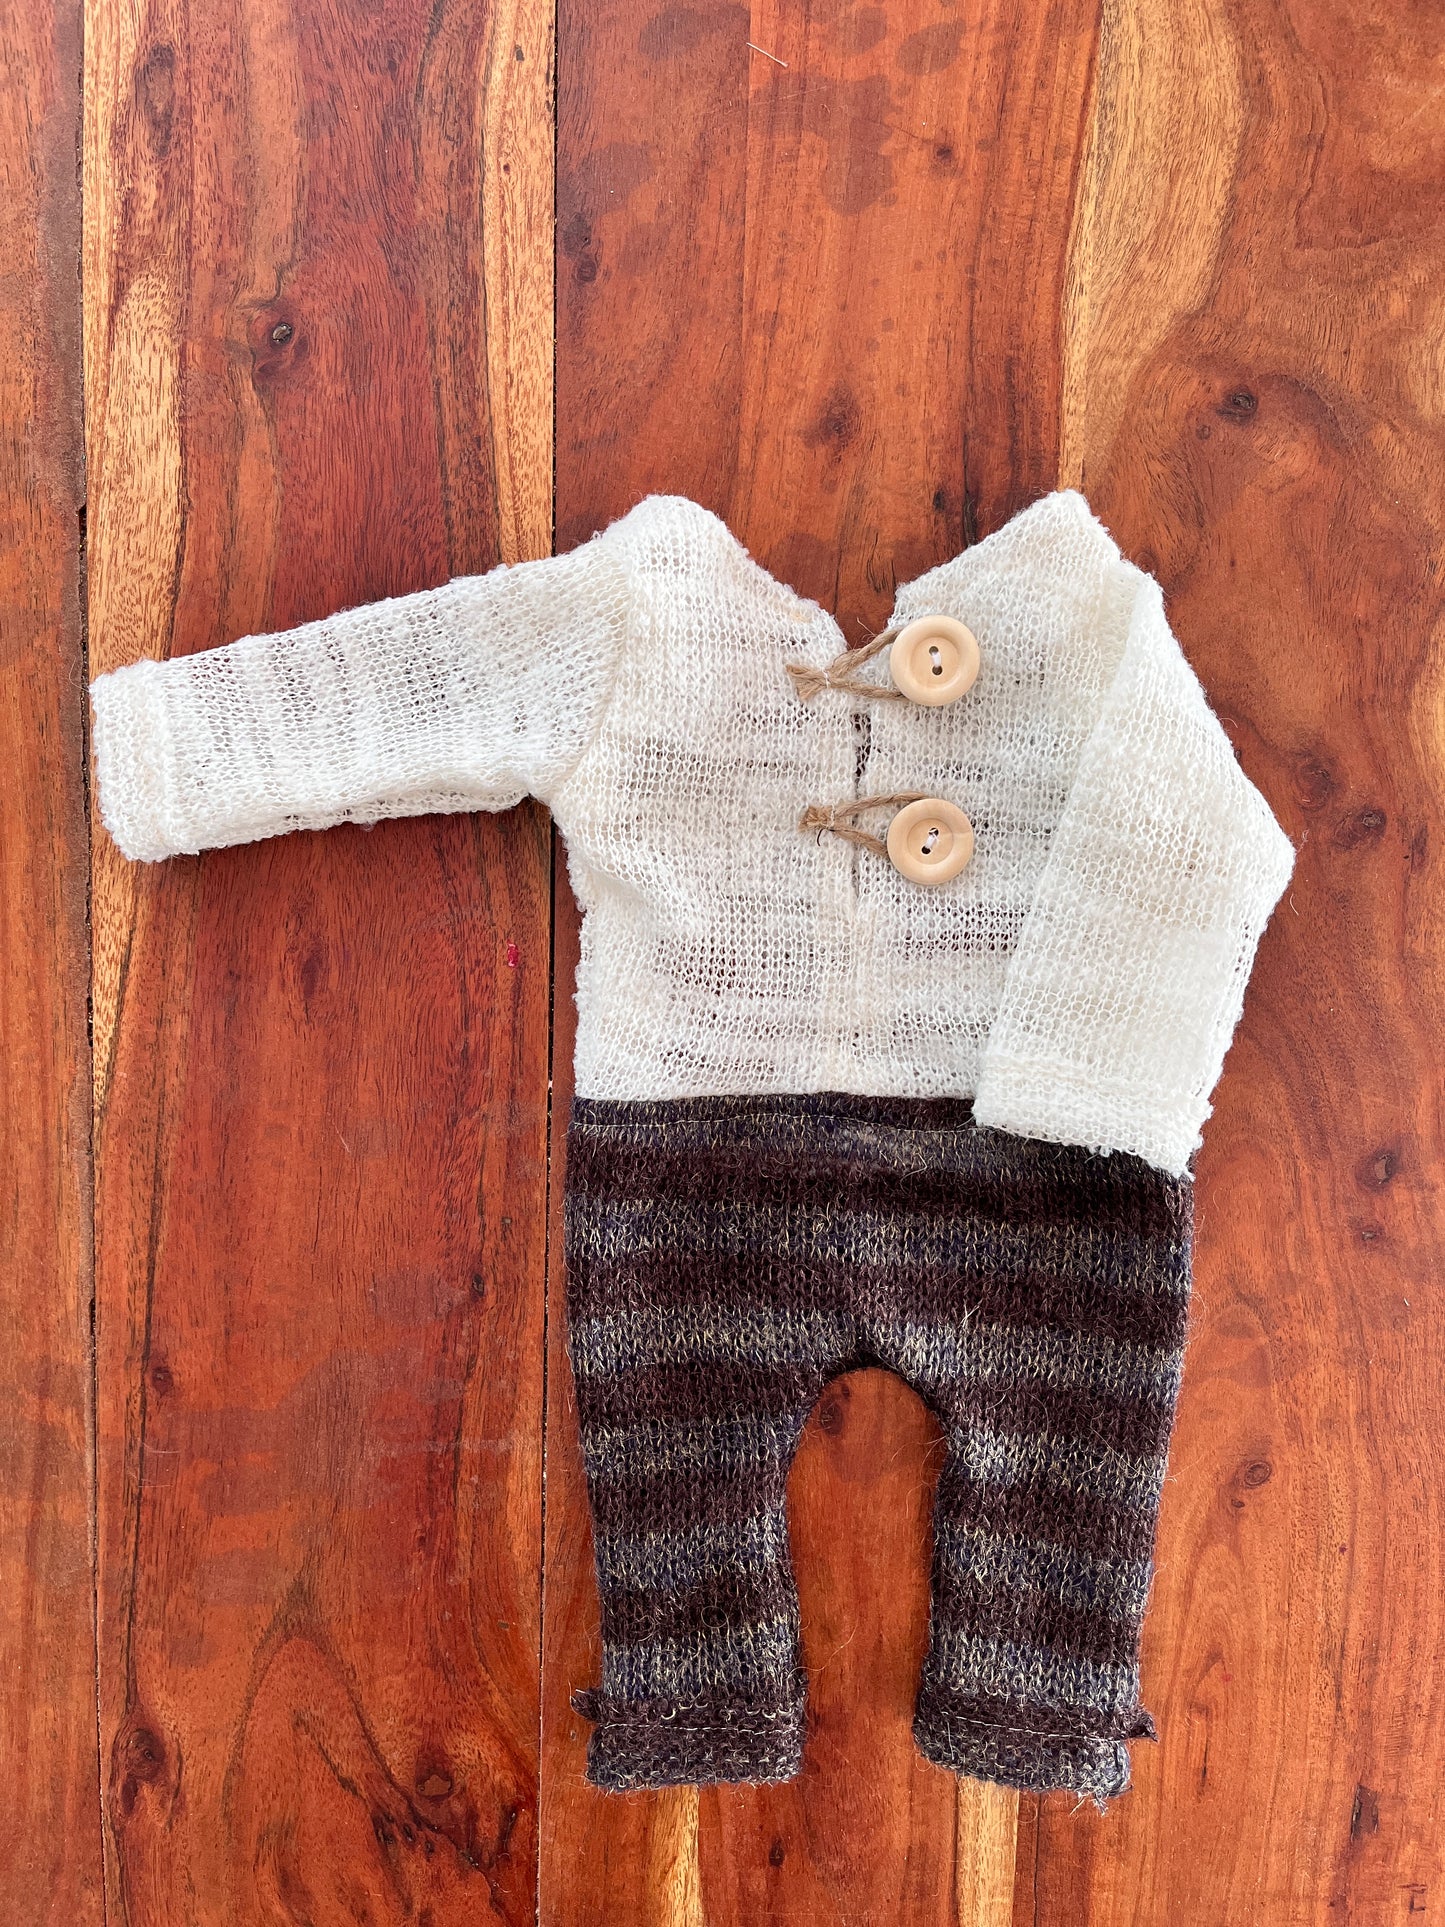 Jack's outfit for the newborn session in boho style.